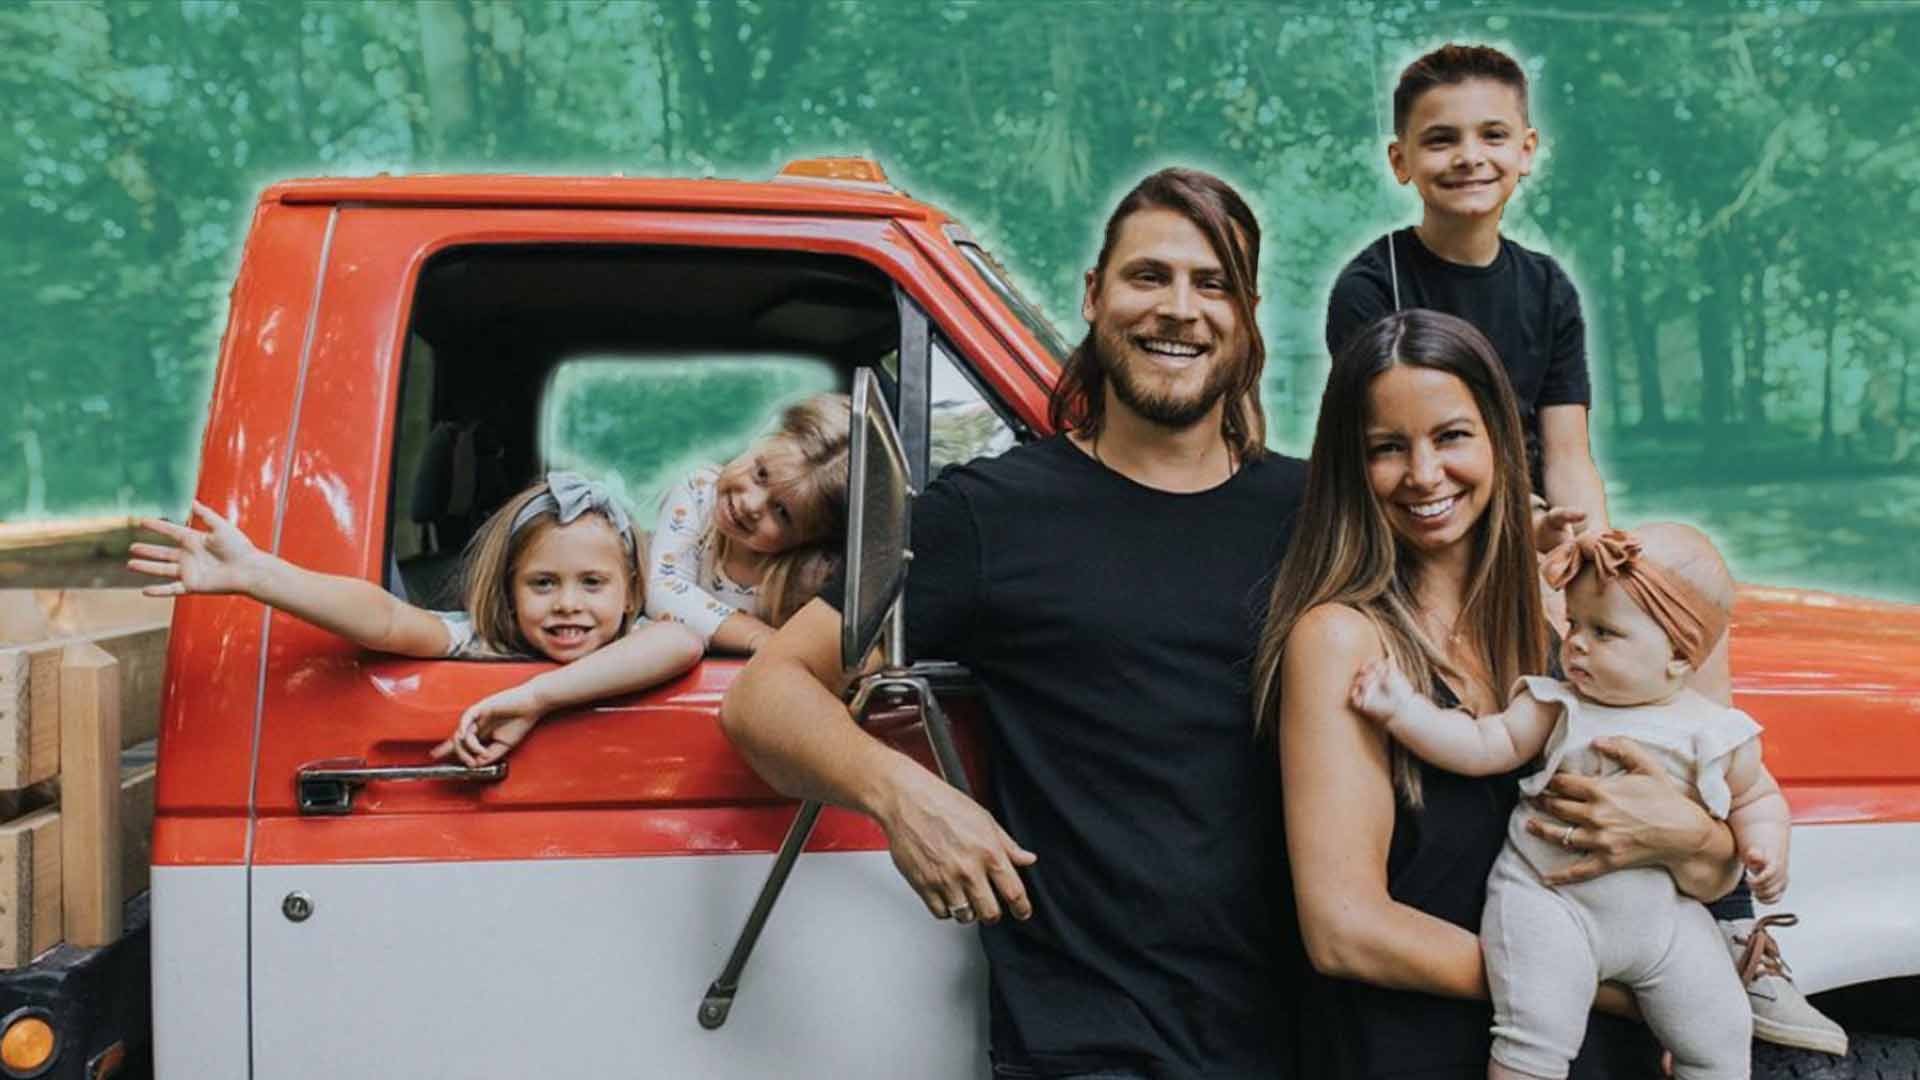 Cory and Anna Asbury with their kids pose in front of a vintage pickup truck